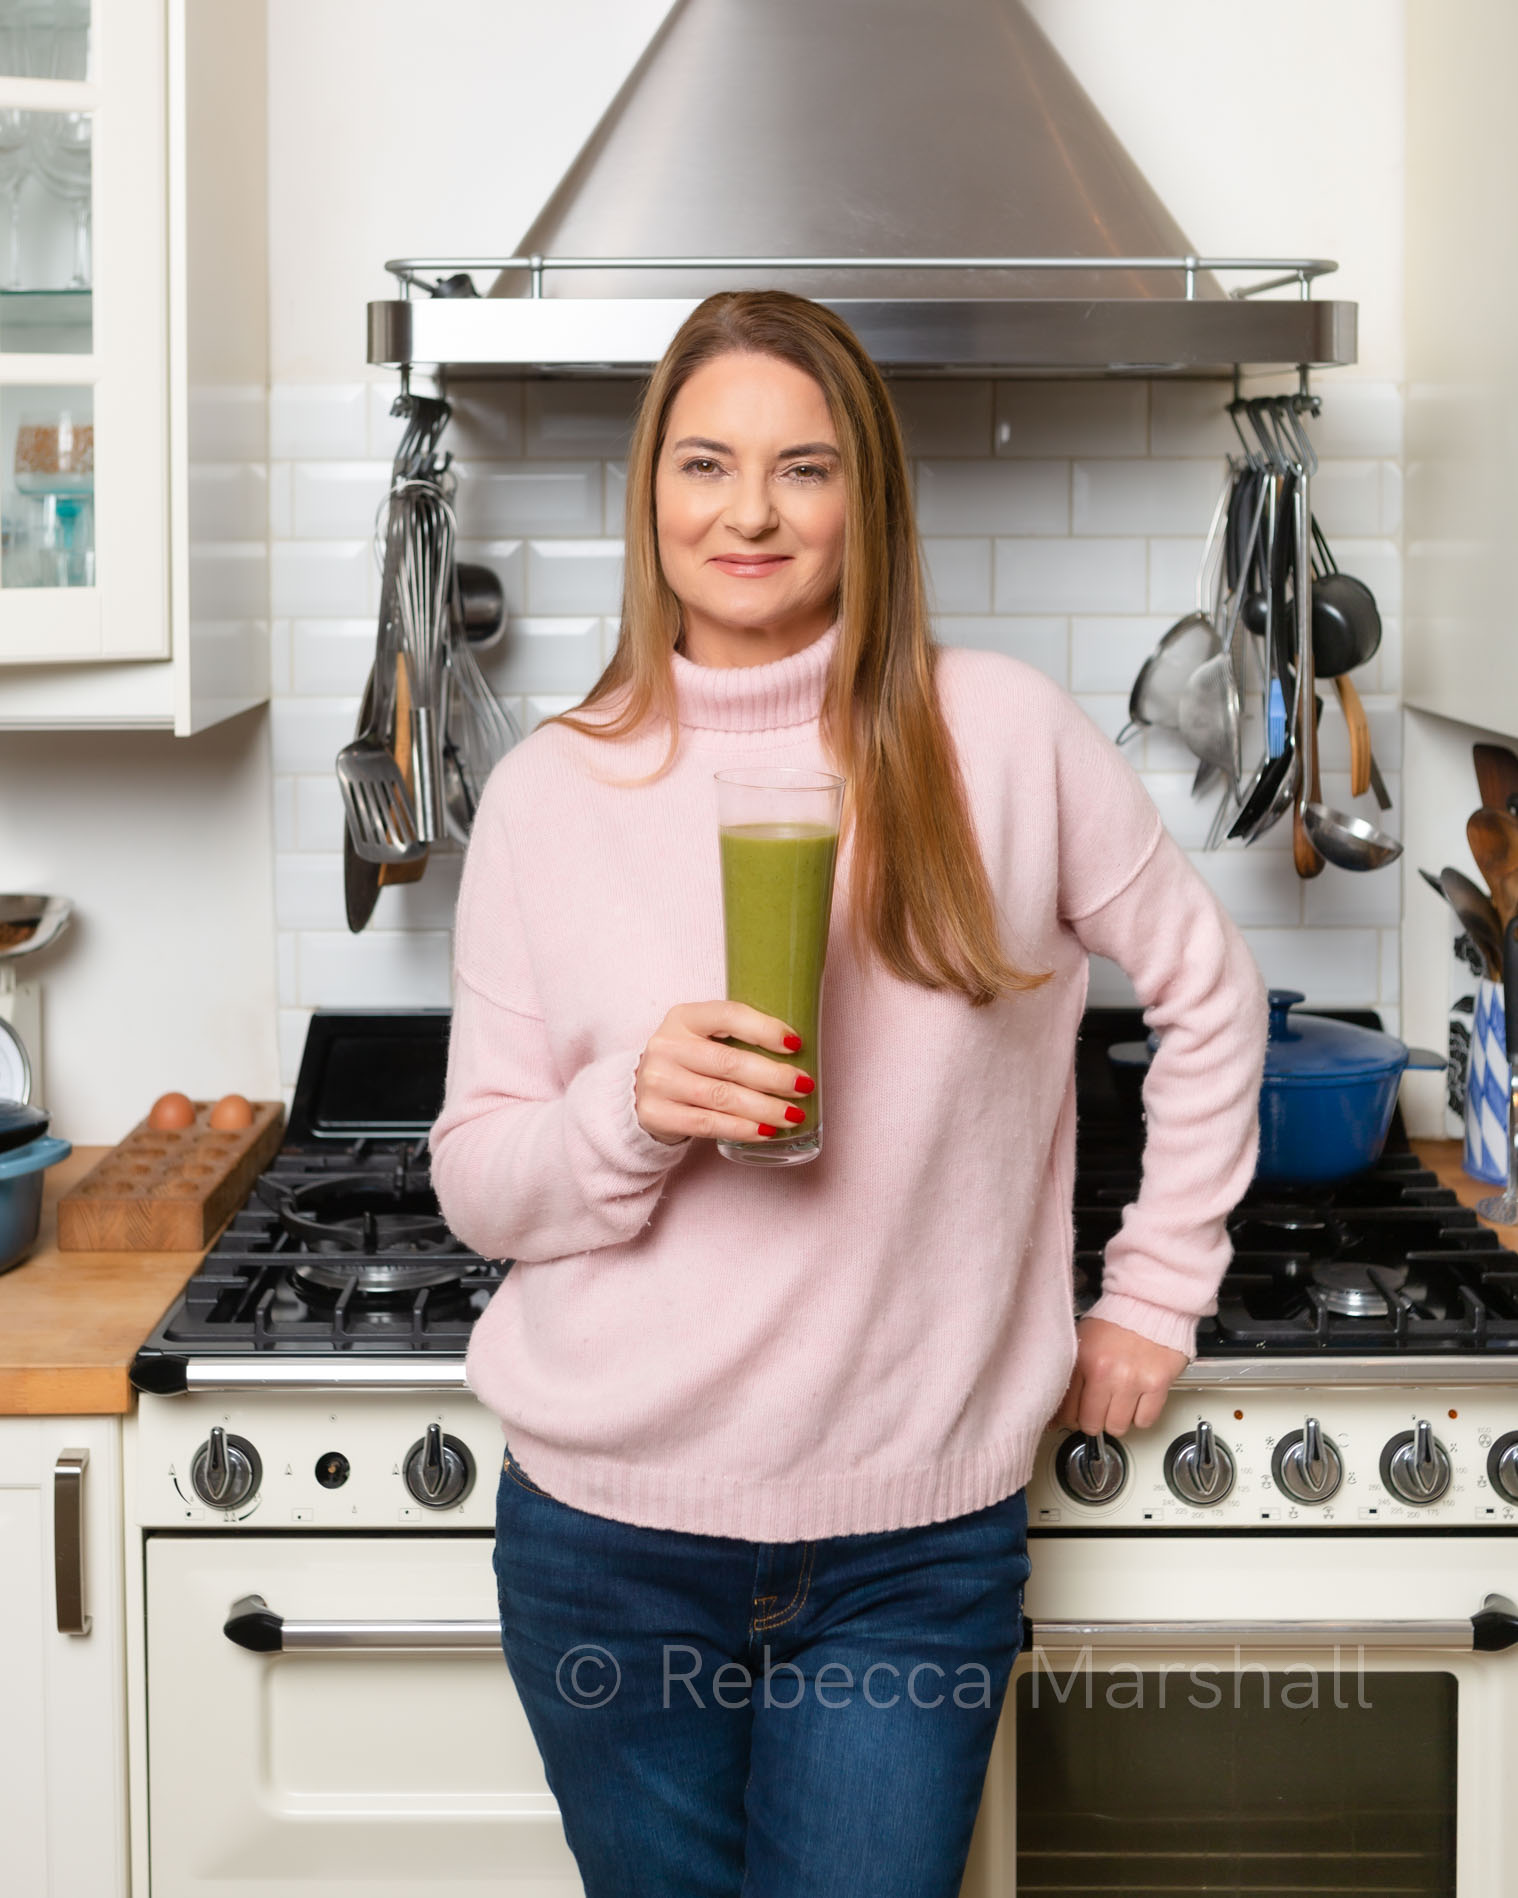 Photograph of a woman in a pink jumper in a kitchen, holding a green smoothie